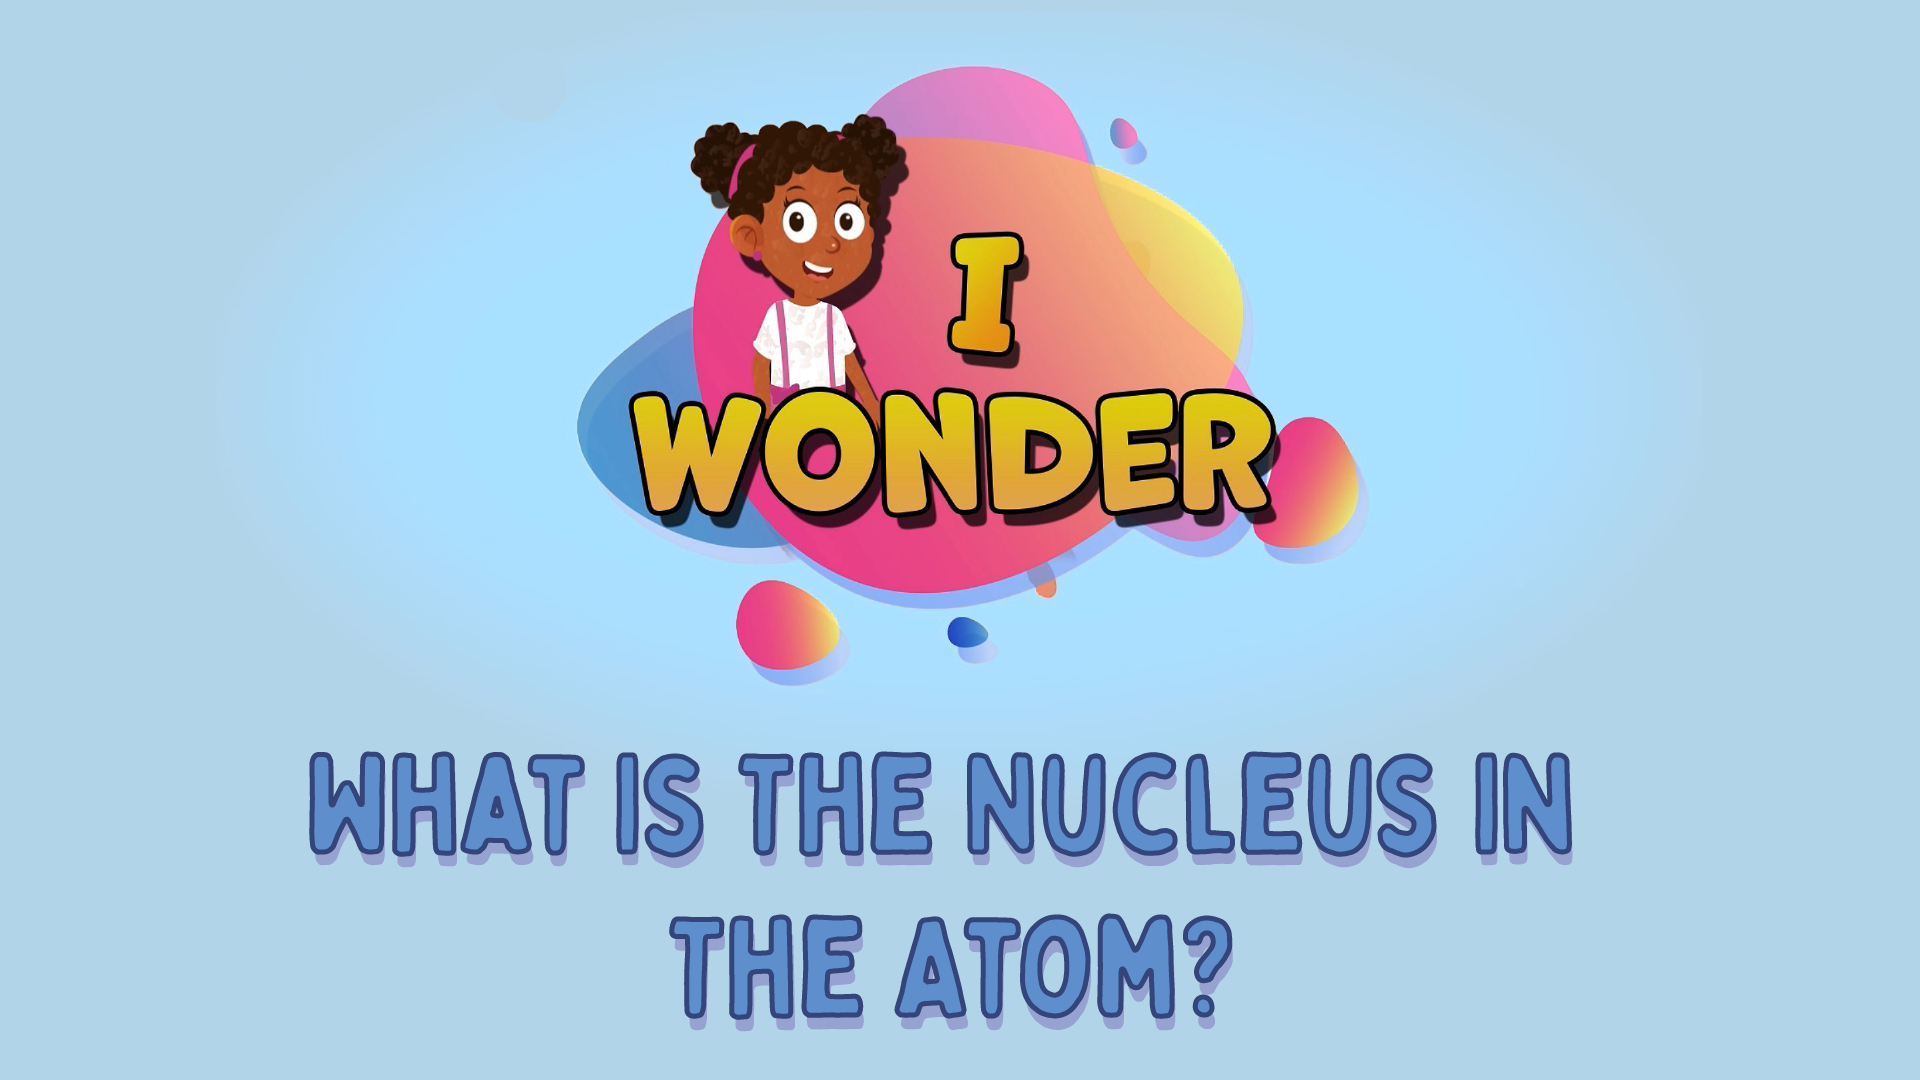 What Is The Nucleus In The Atom?